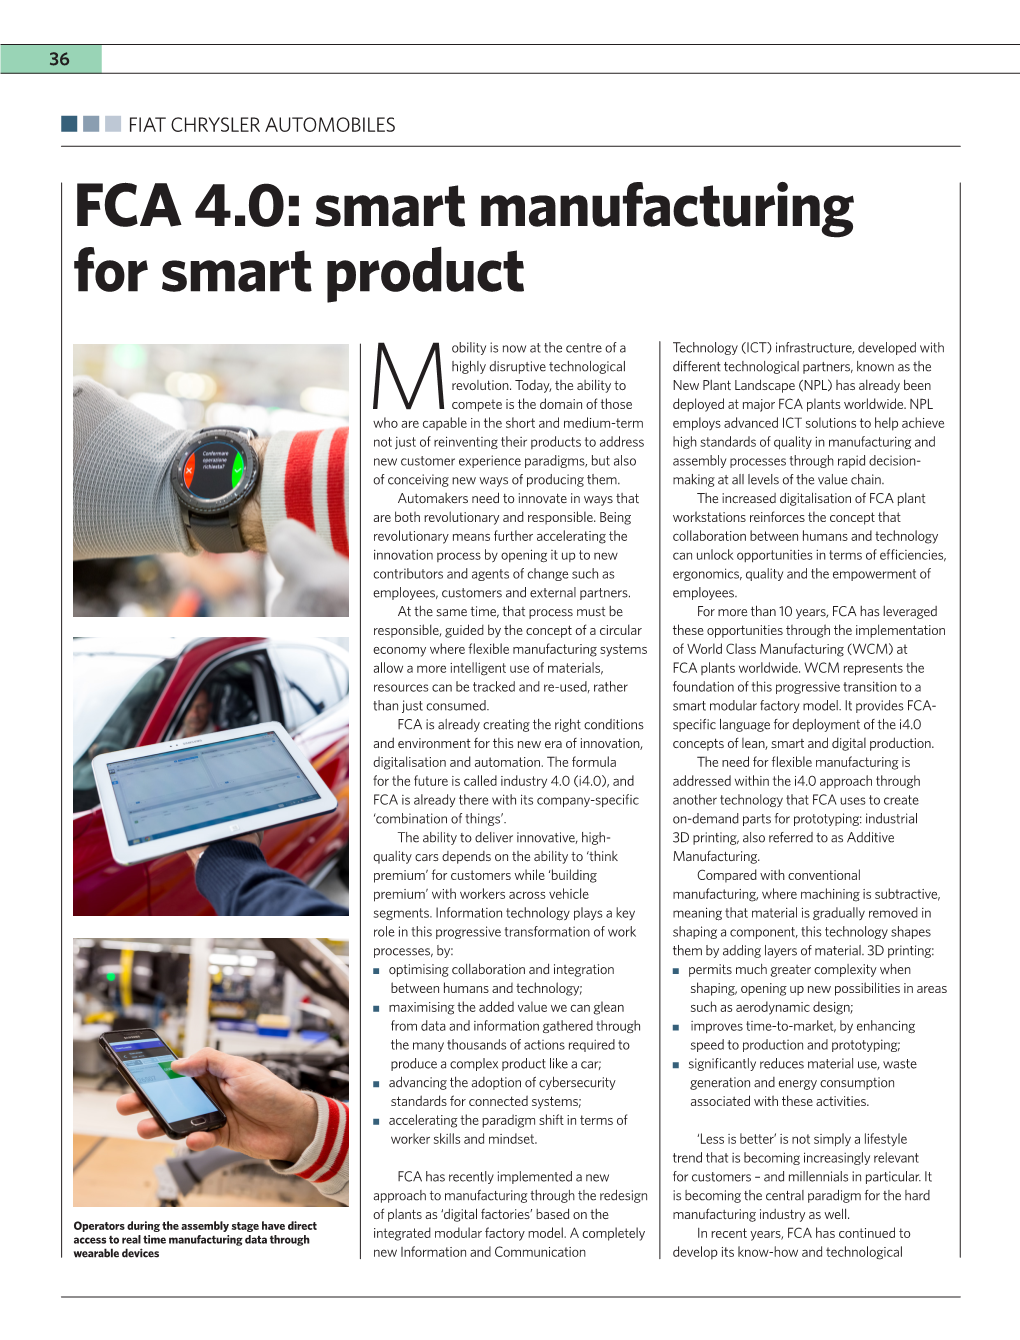 FCA 4.0: Smart Manufacturing for Smart Product